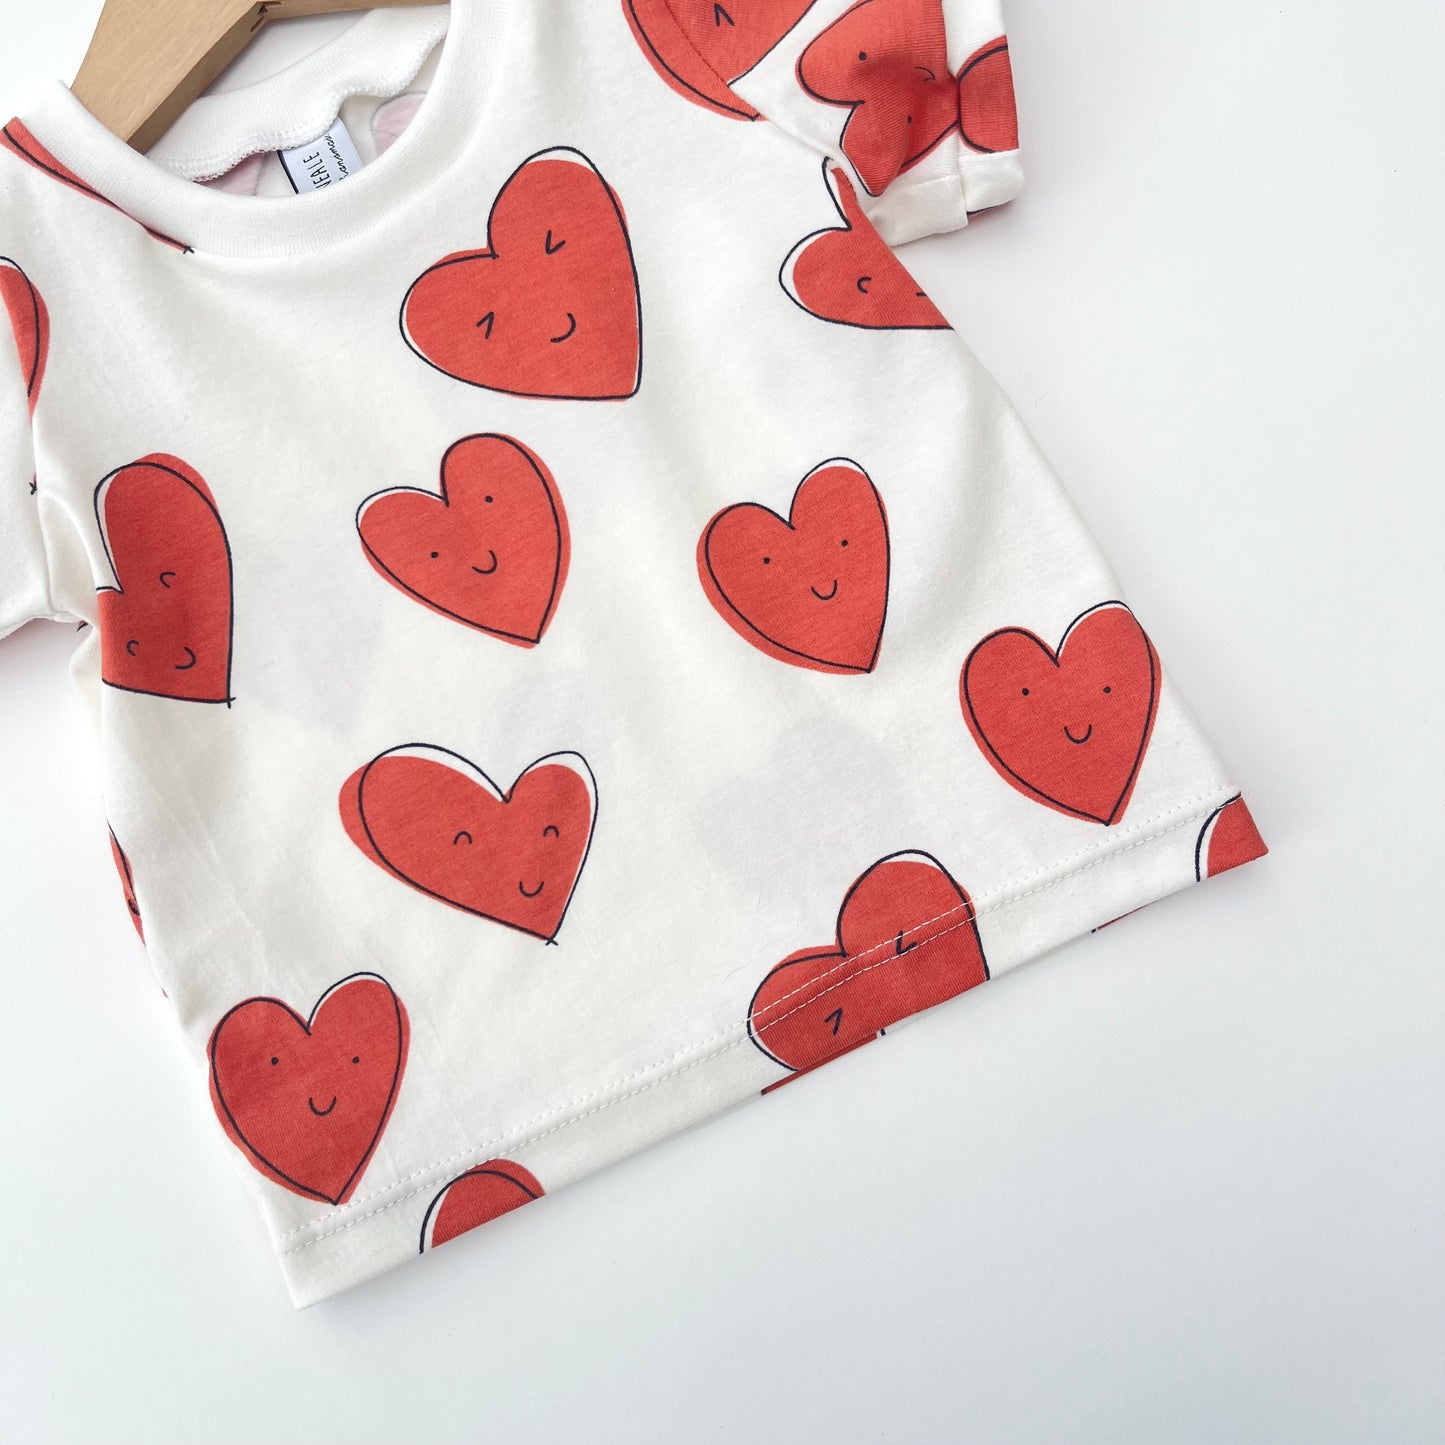 Lots of Love T-shirt - Long or Short Sleeve